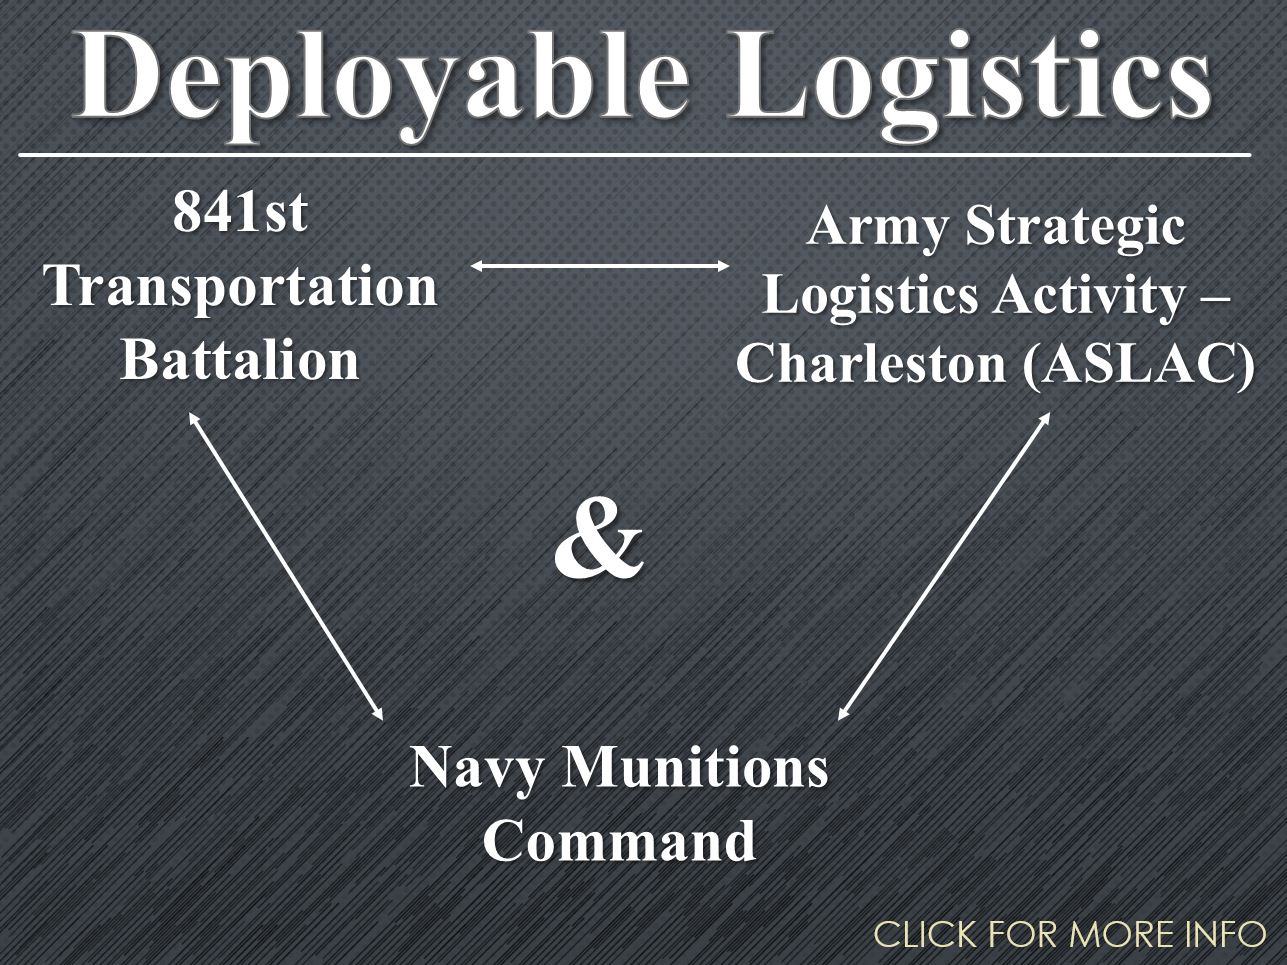 An infographic for Deployable Logistics